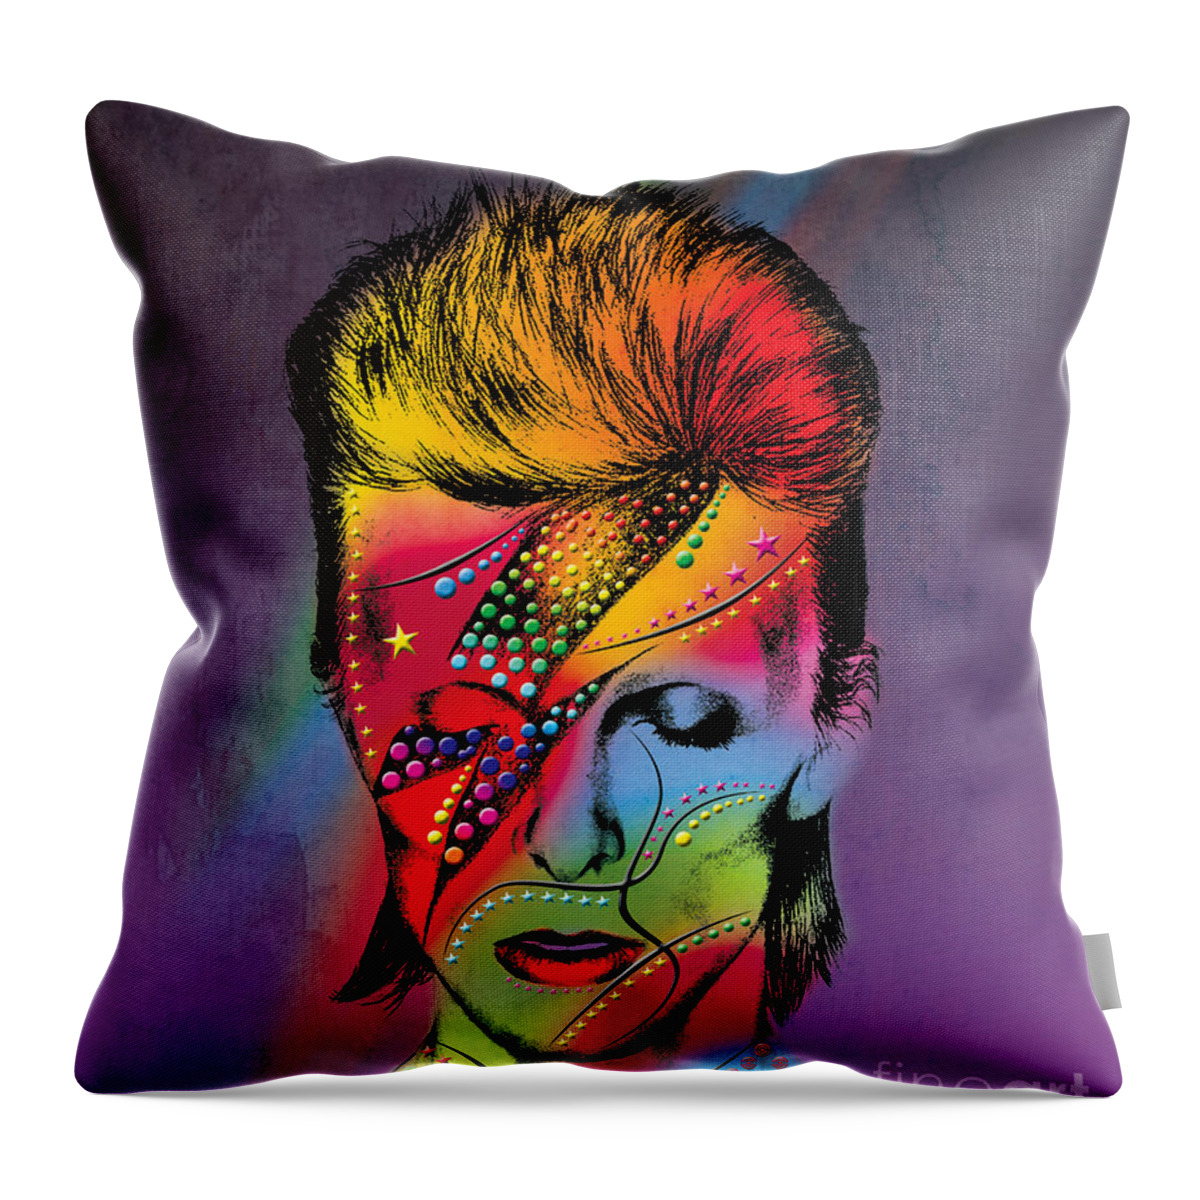  Throw Pillow featuring the digital art David Bowie by Mark Ashkenazi